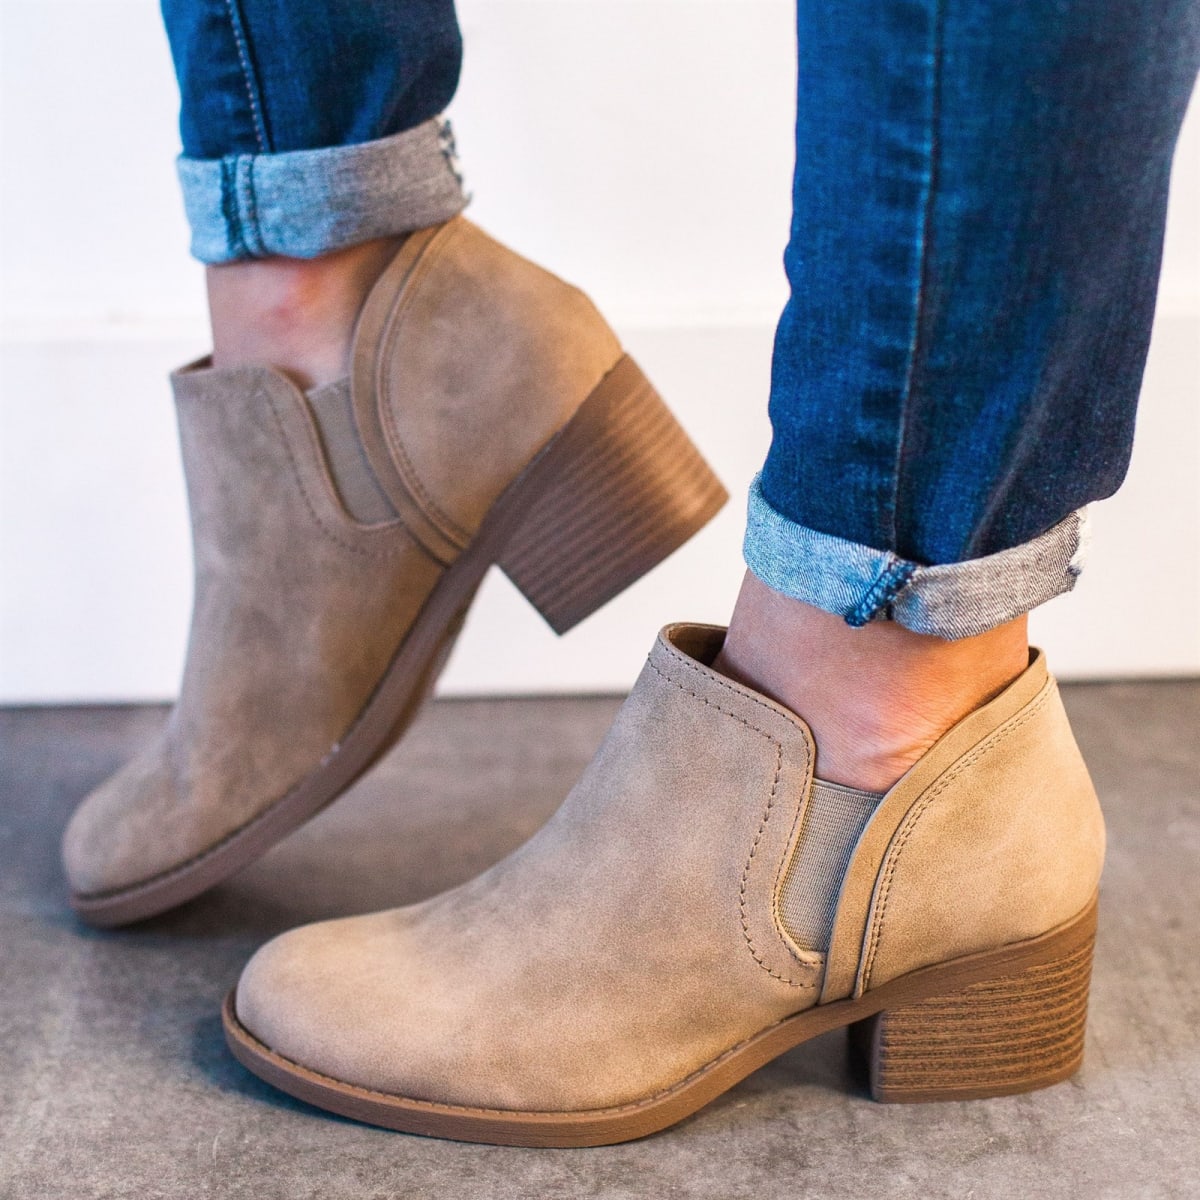 Tessa Fall Booties Only $34.99 with FREE Shipping! - Become a Coupon Queen